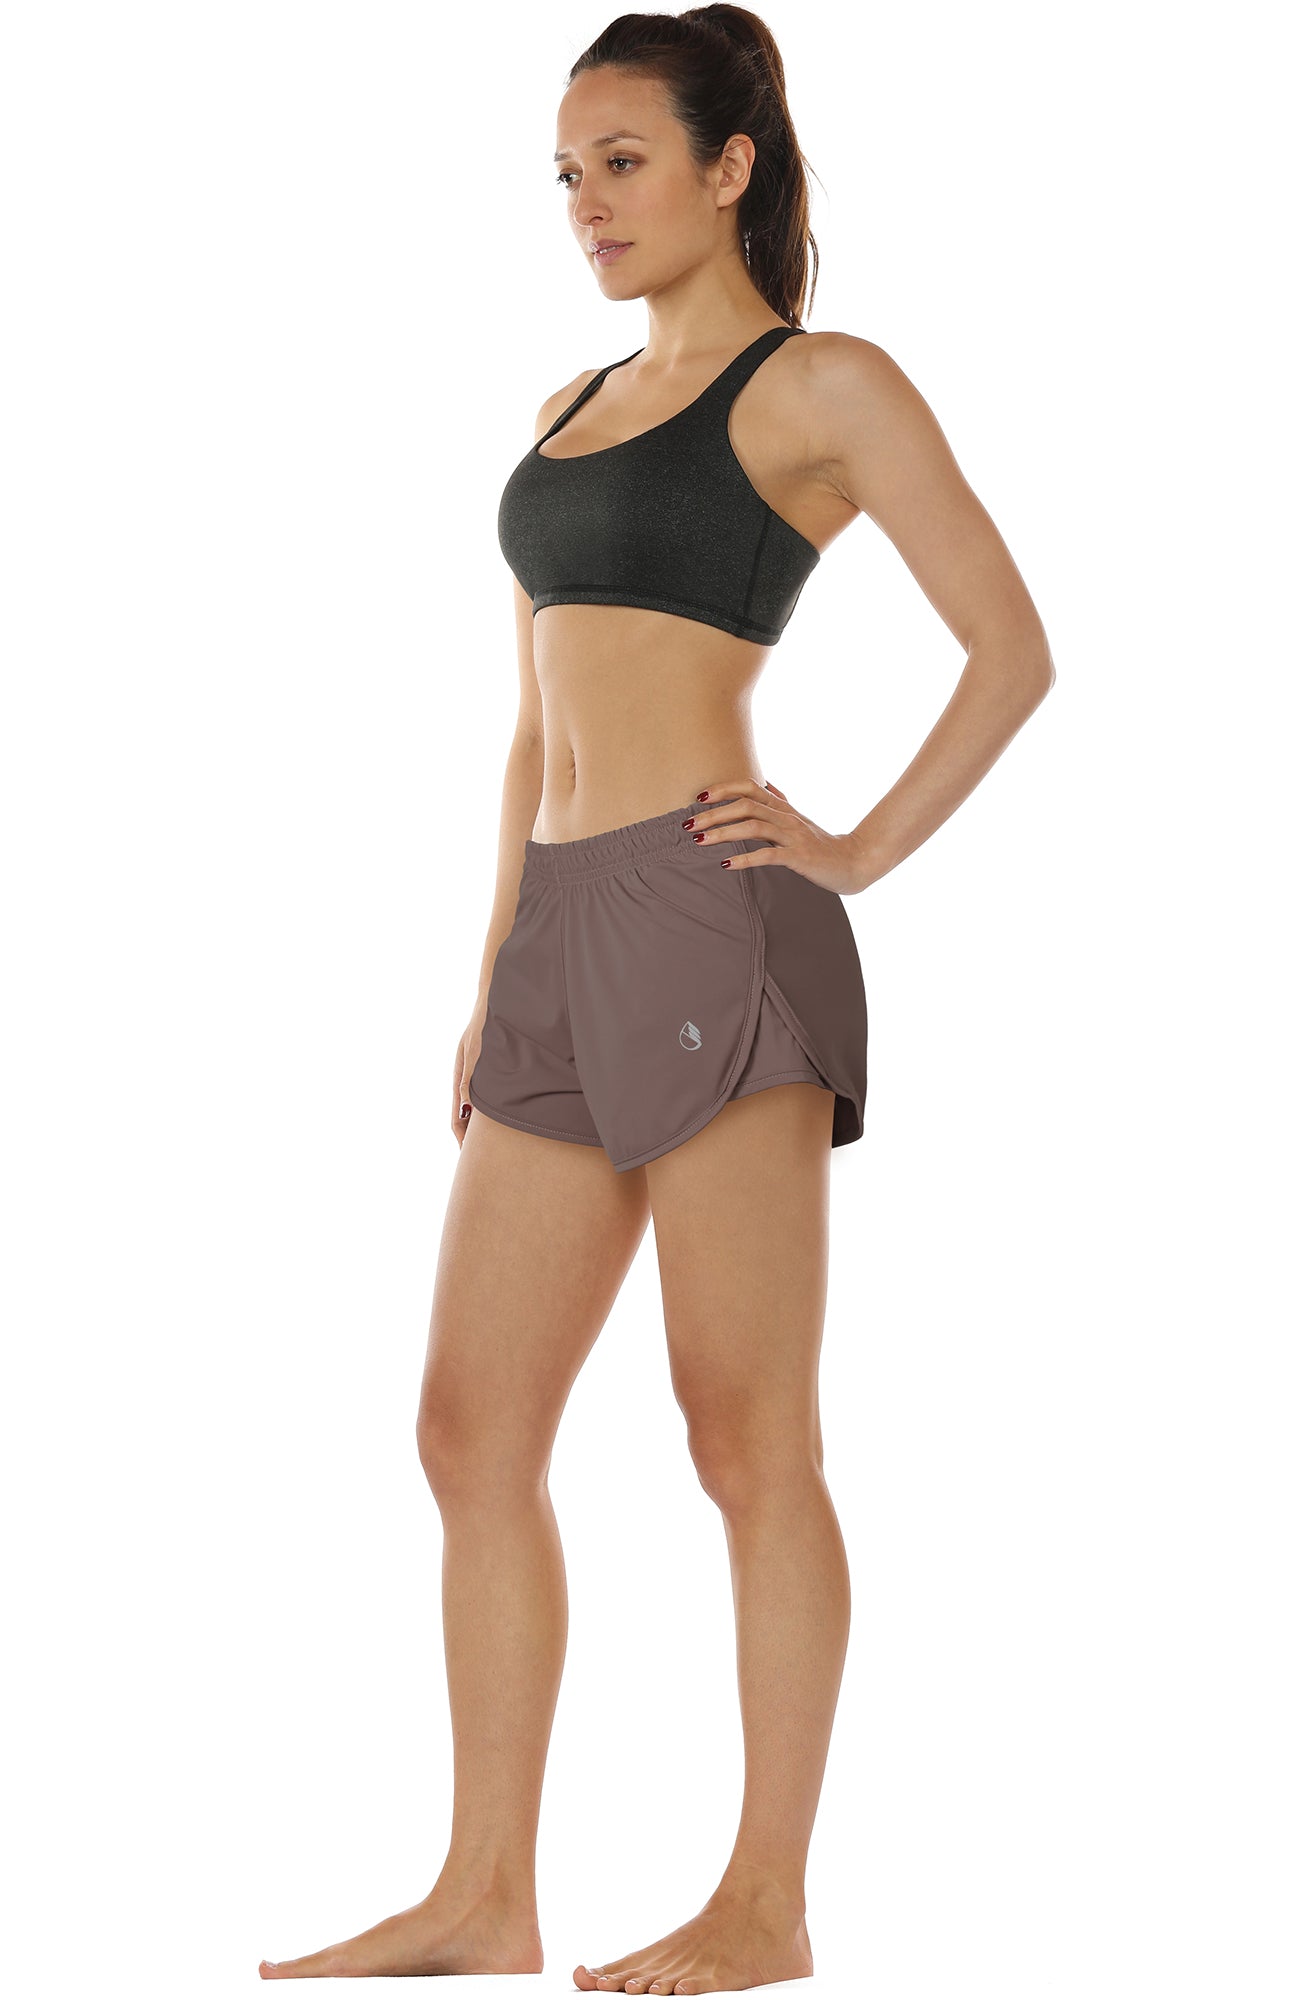 icyzone Workout Shorts Built-in Brief - Women's Gym Exercise